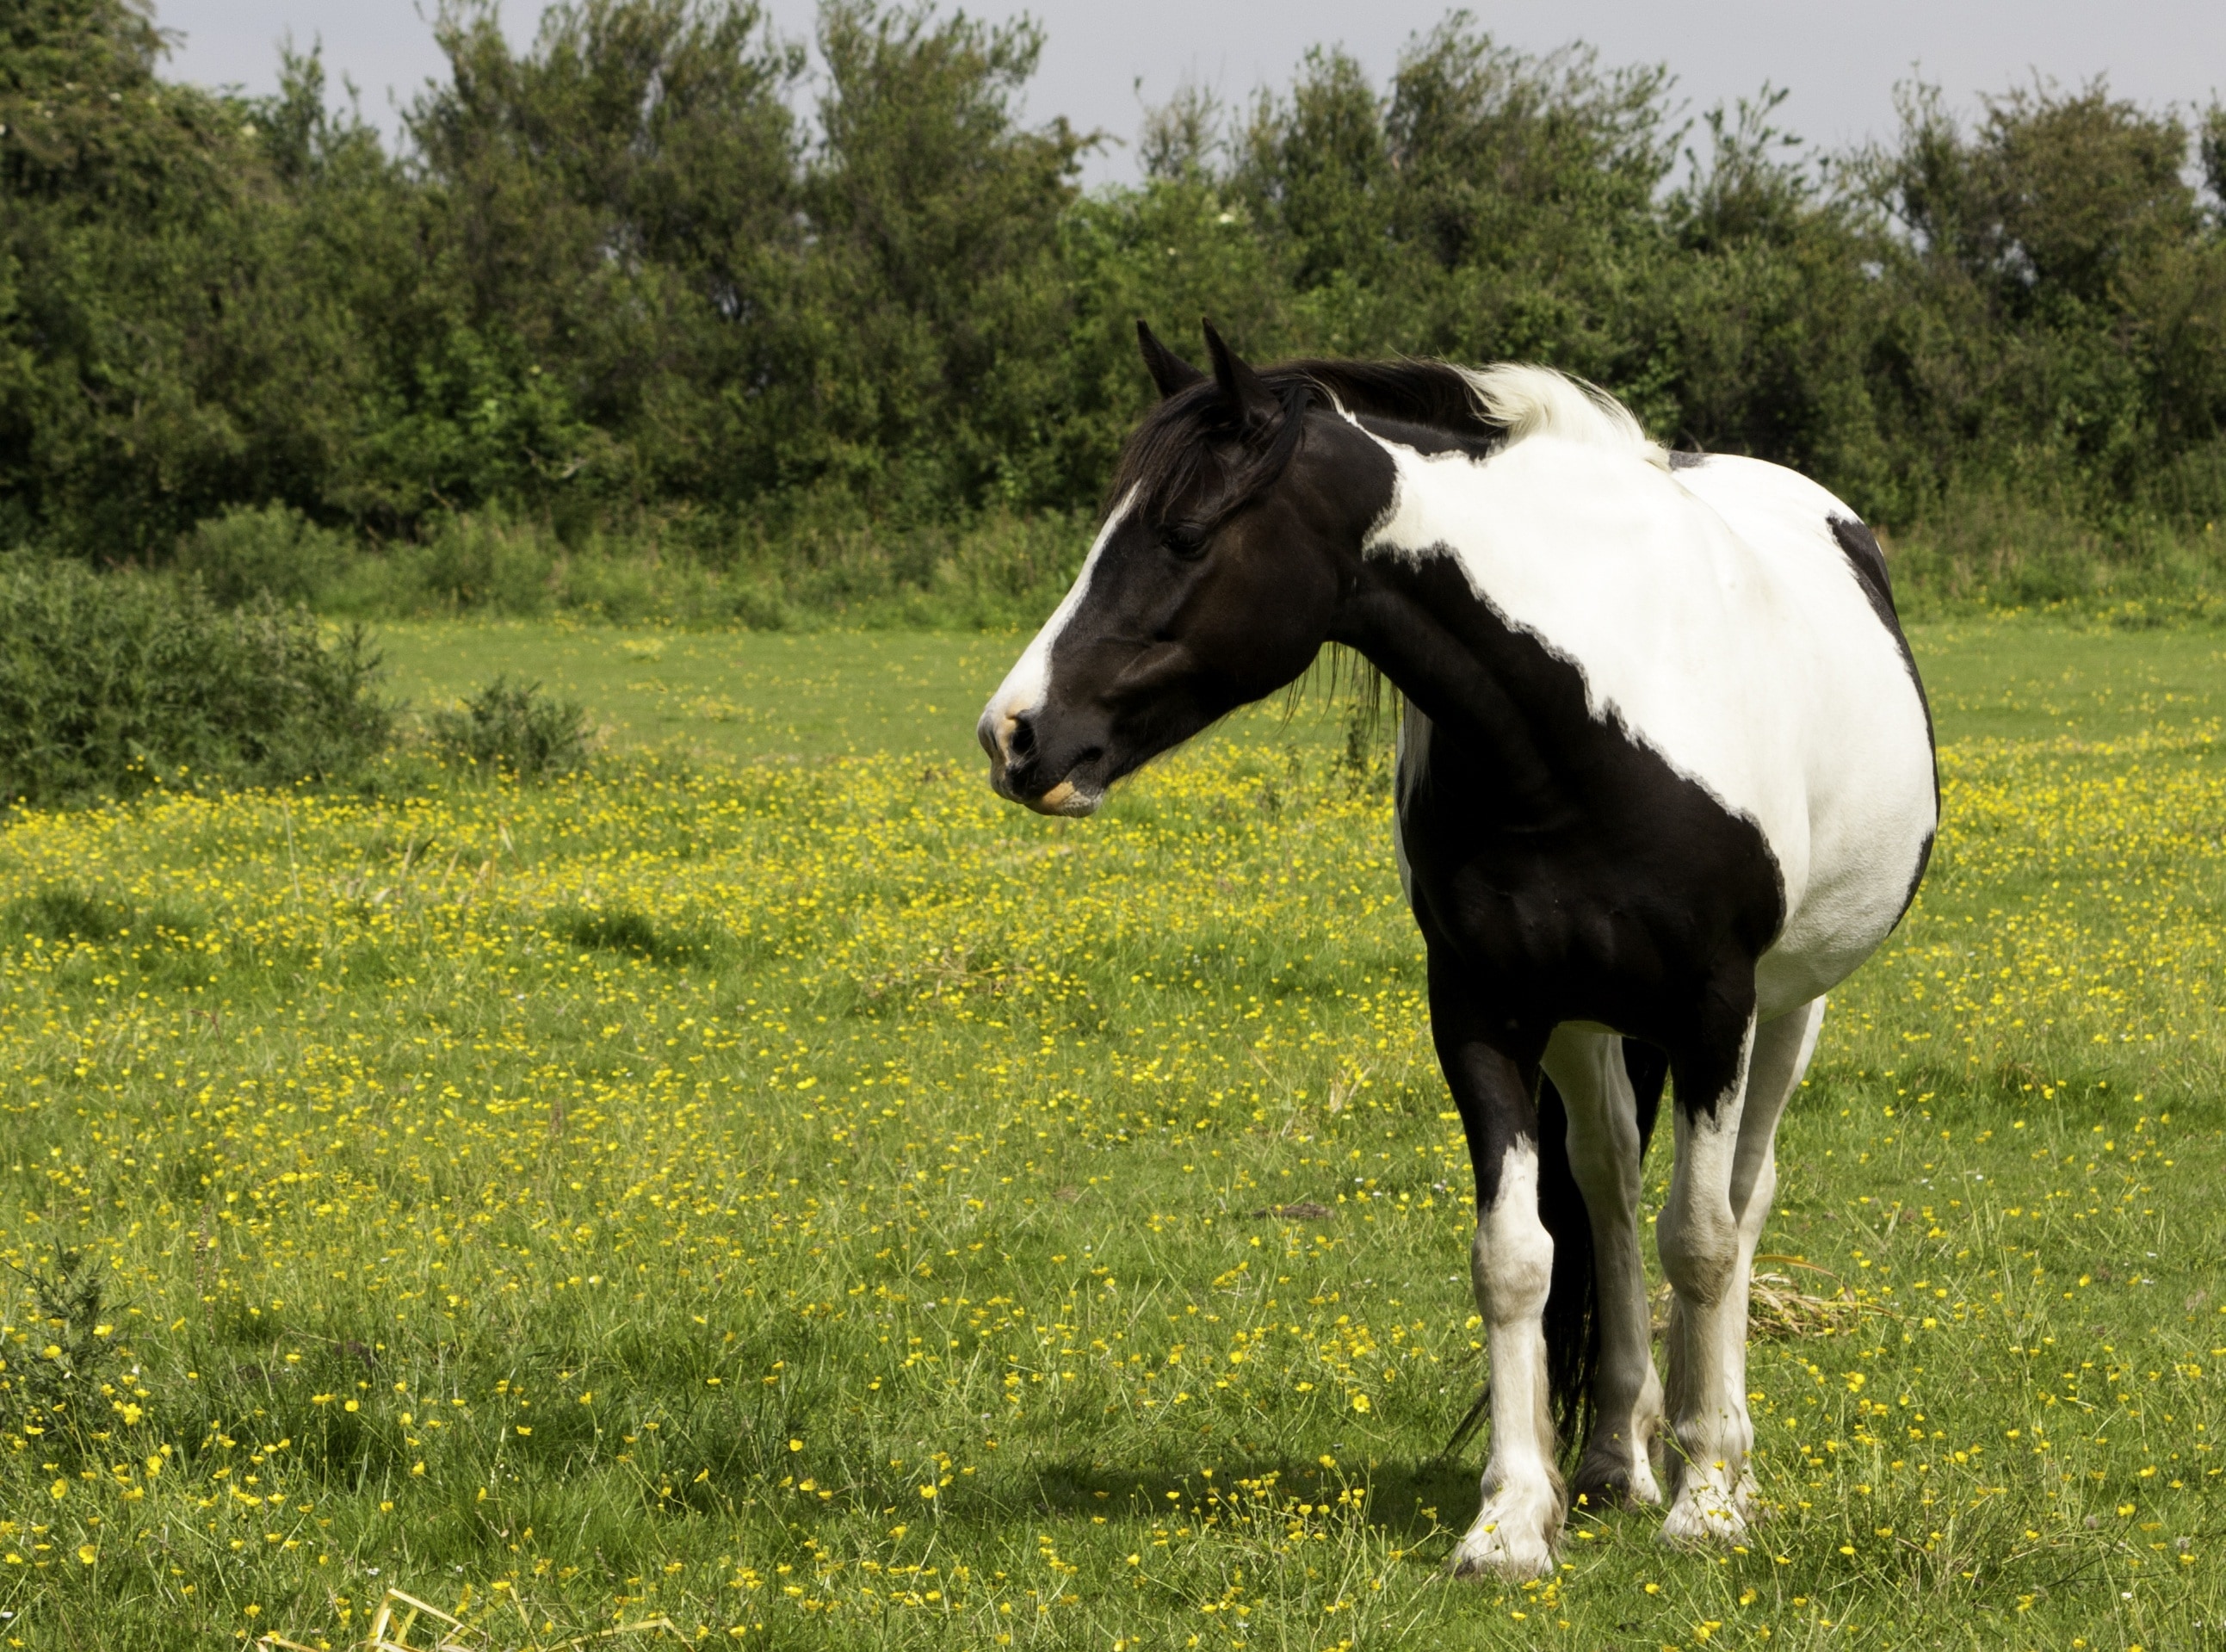 white and black horse